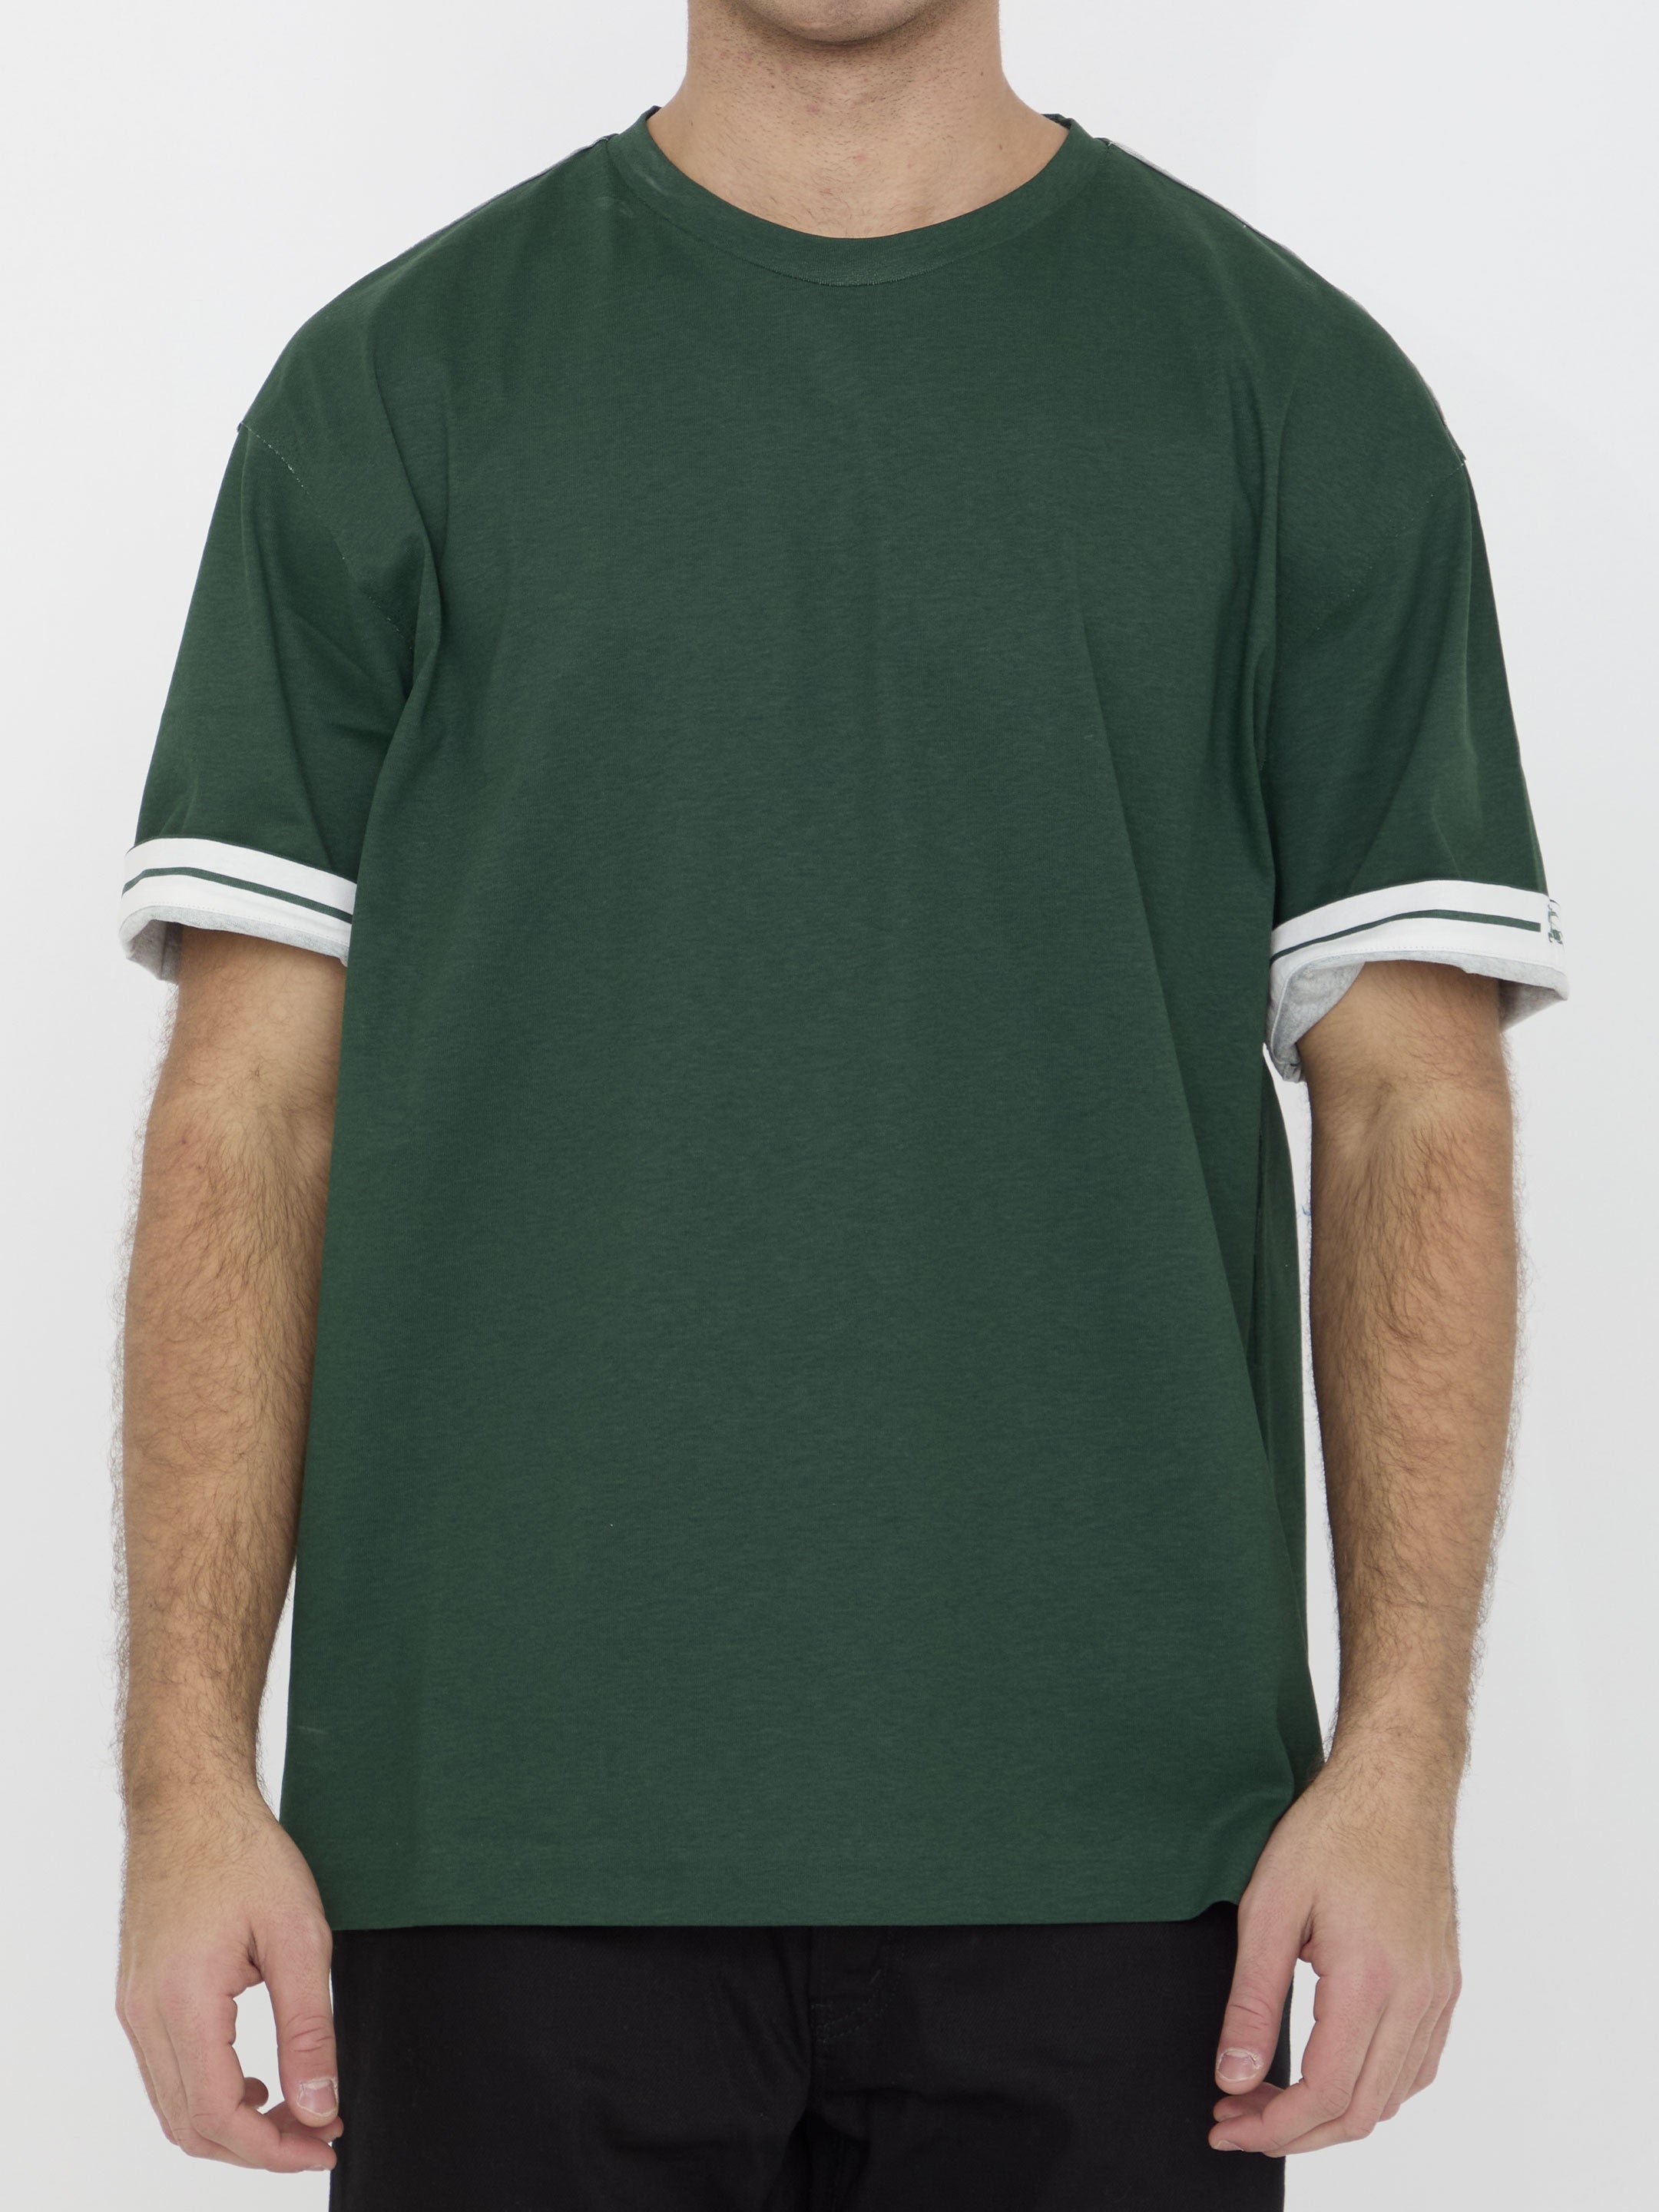 BURBERRY-OUTLET-SALE-Cotton-t-shirt-Shirts-L-GREEN-ARCHIVE-COLLECTION_06860704-3a85-479c-b125-439e5daa17a7.jpg